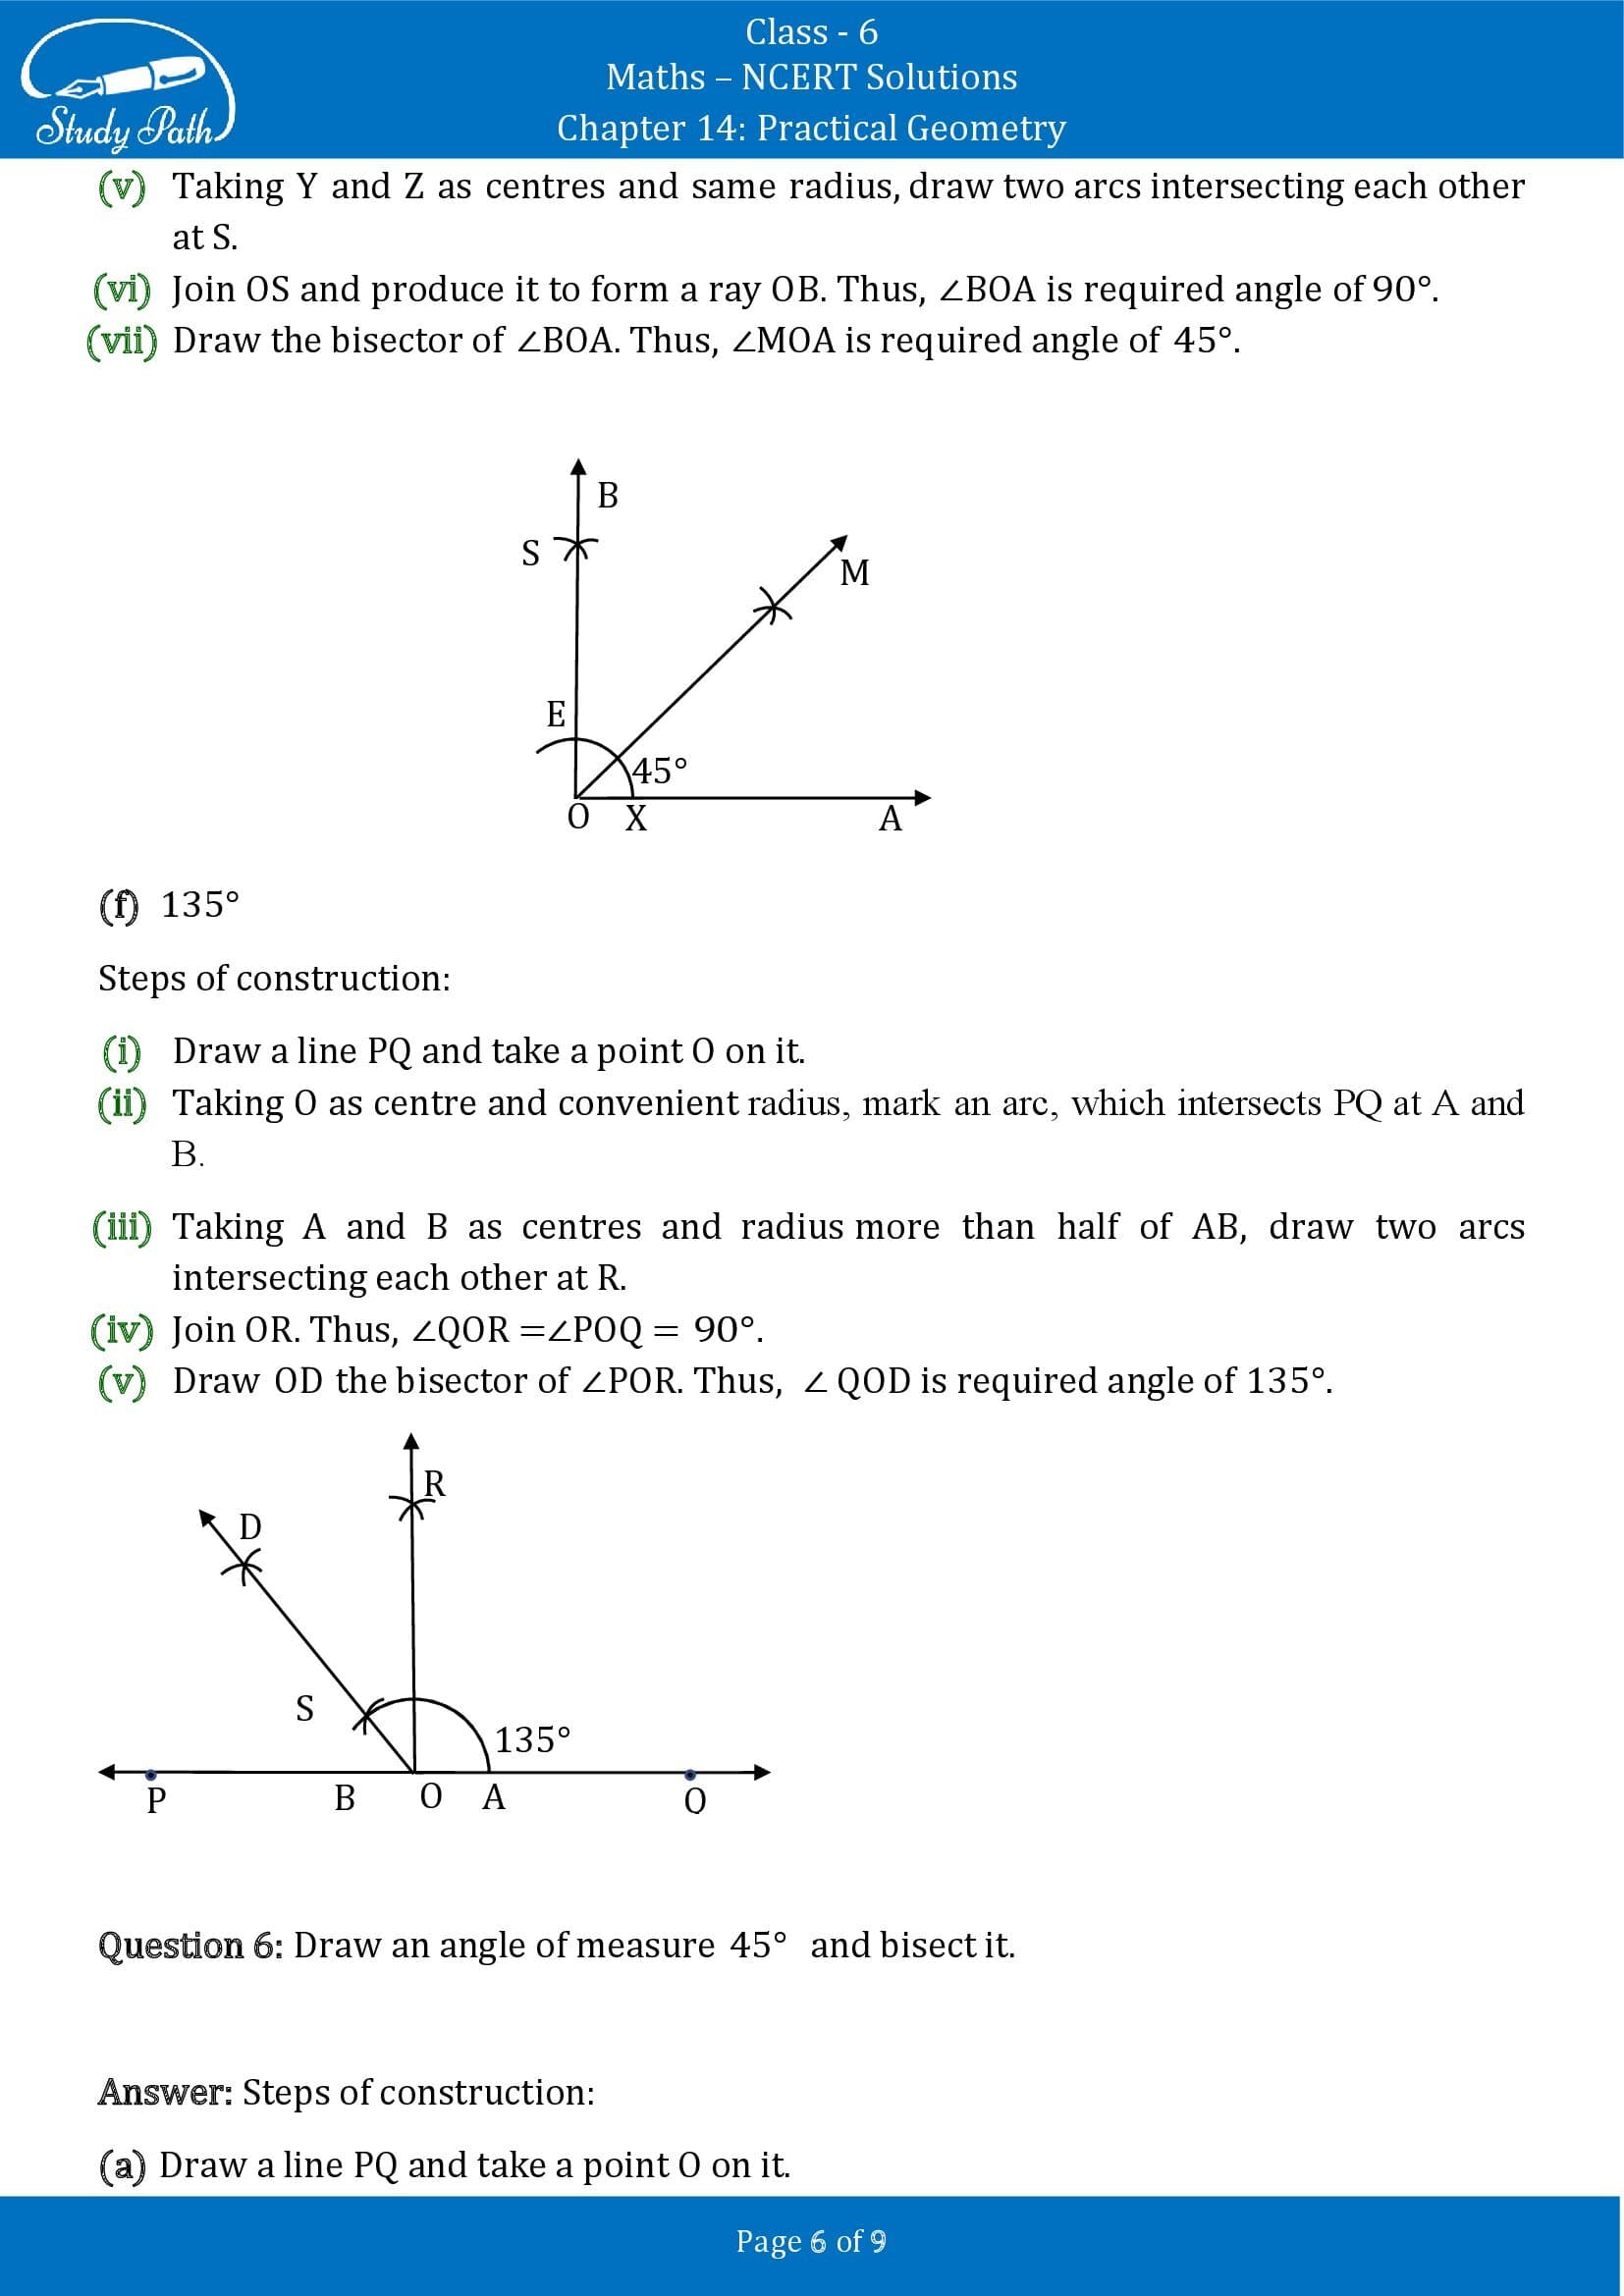 NCERT Solutions for Class 6 Maths Chapter 14 Practical Geometry Exercise 14.6 00006